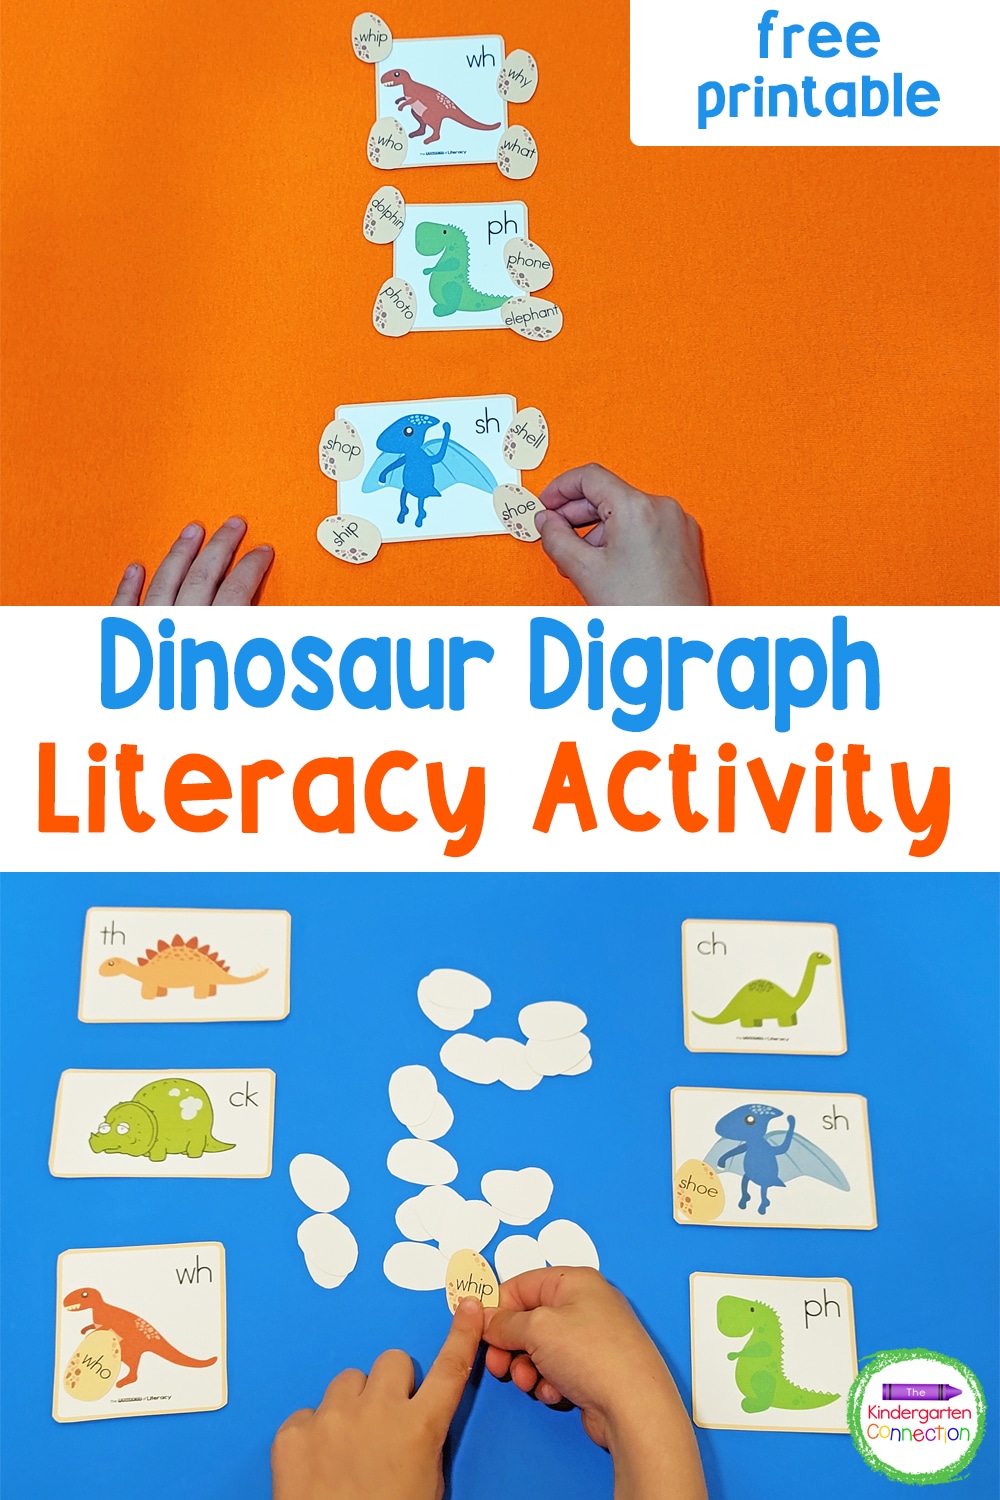 This free printable Dinosaur Digraph Activity makes a perfect literacy center for early learners to use independently or in small groups!